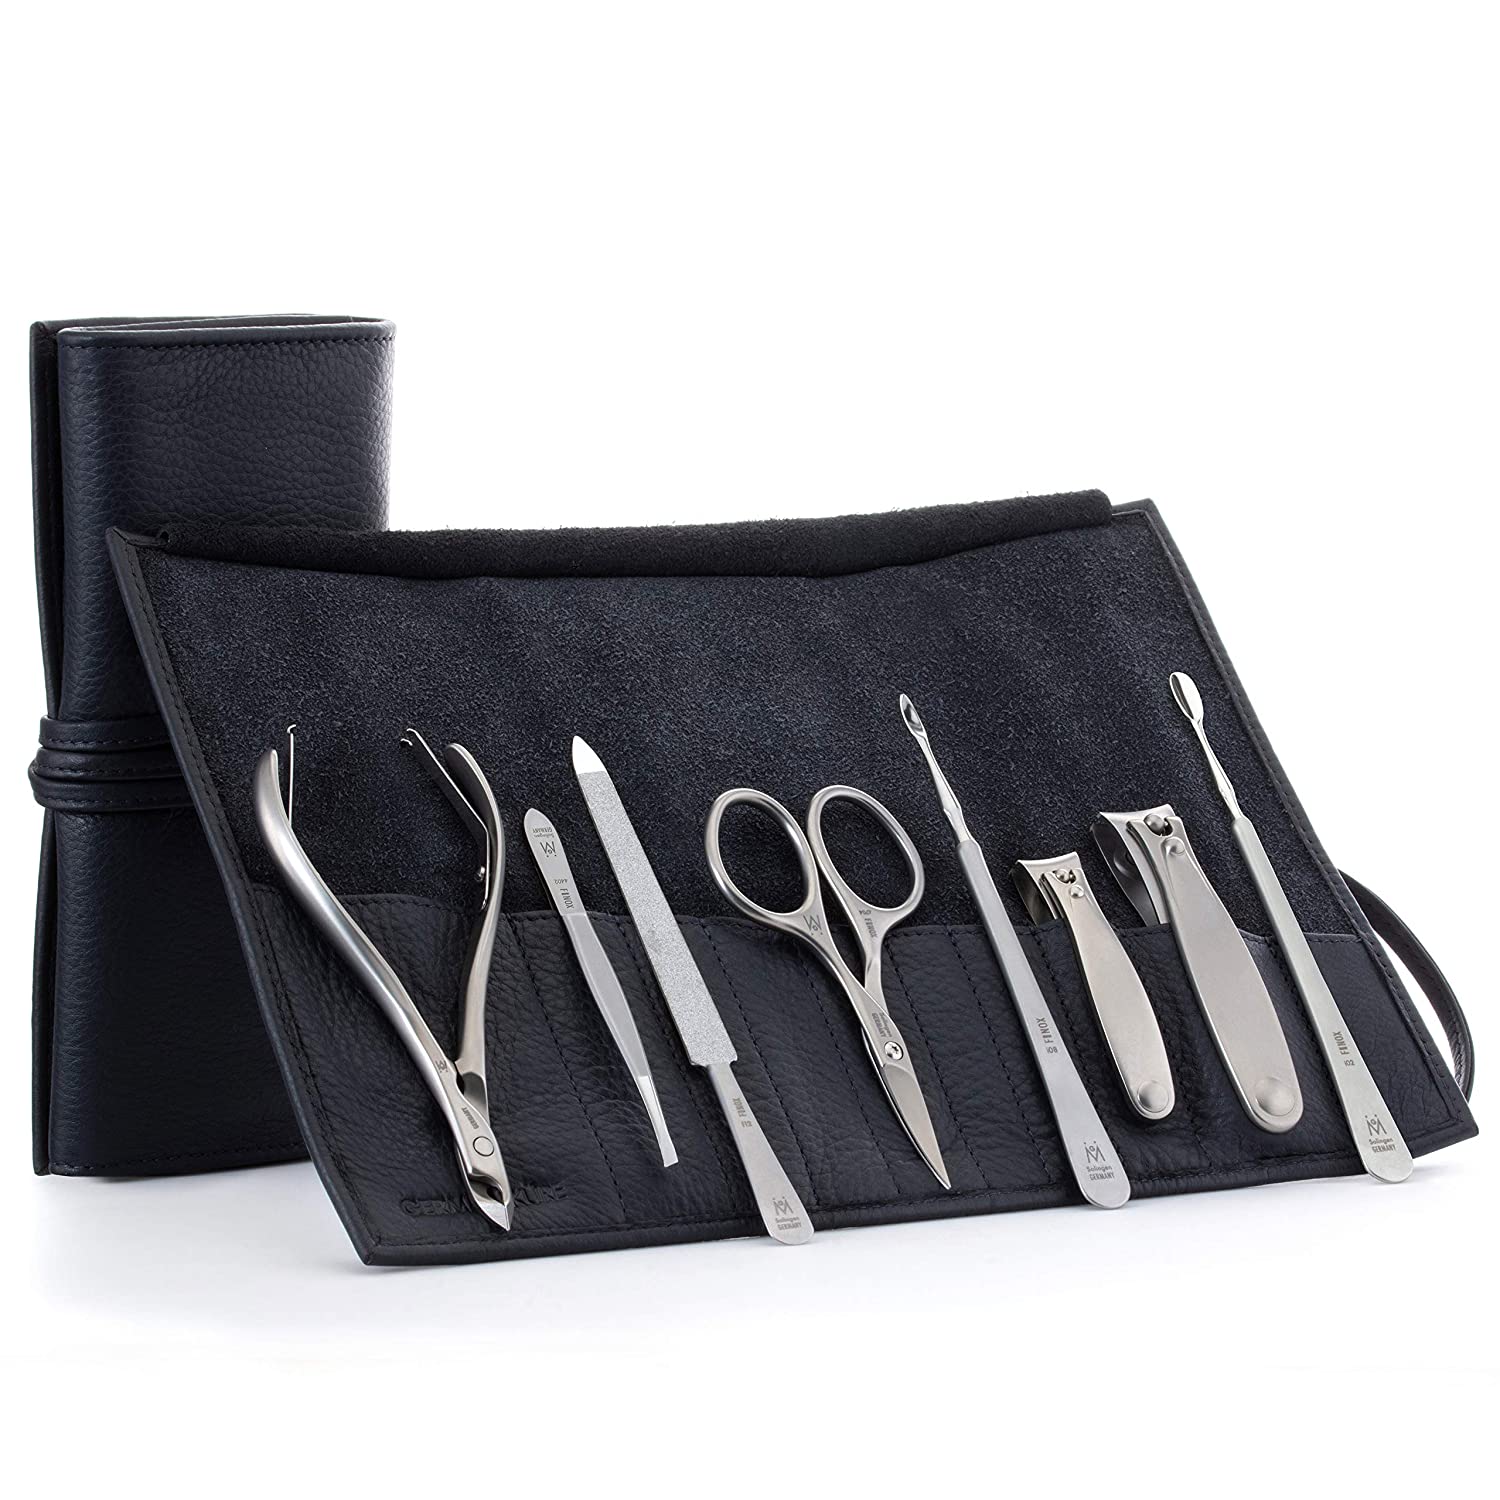 8pc Manicure Set with Sapphire Nail File in Leather Roll